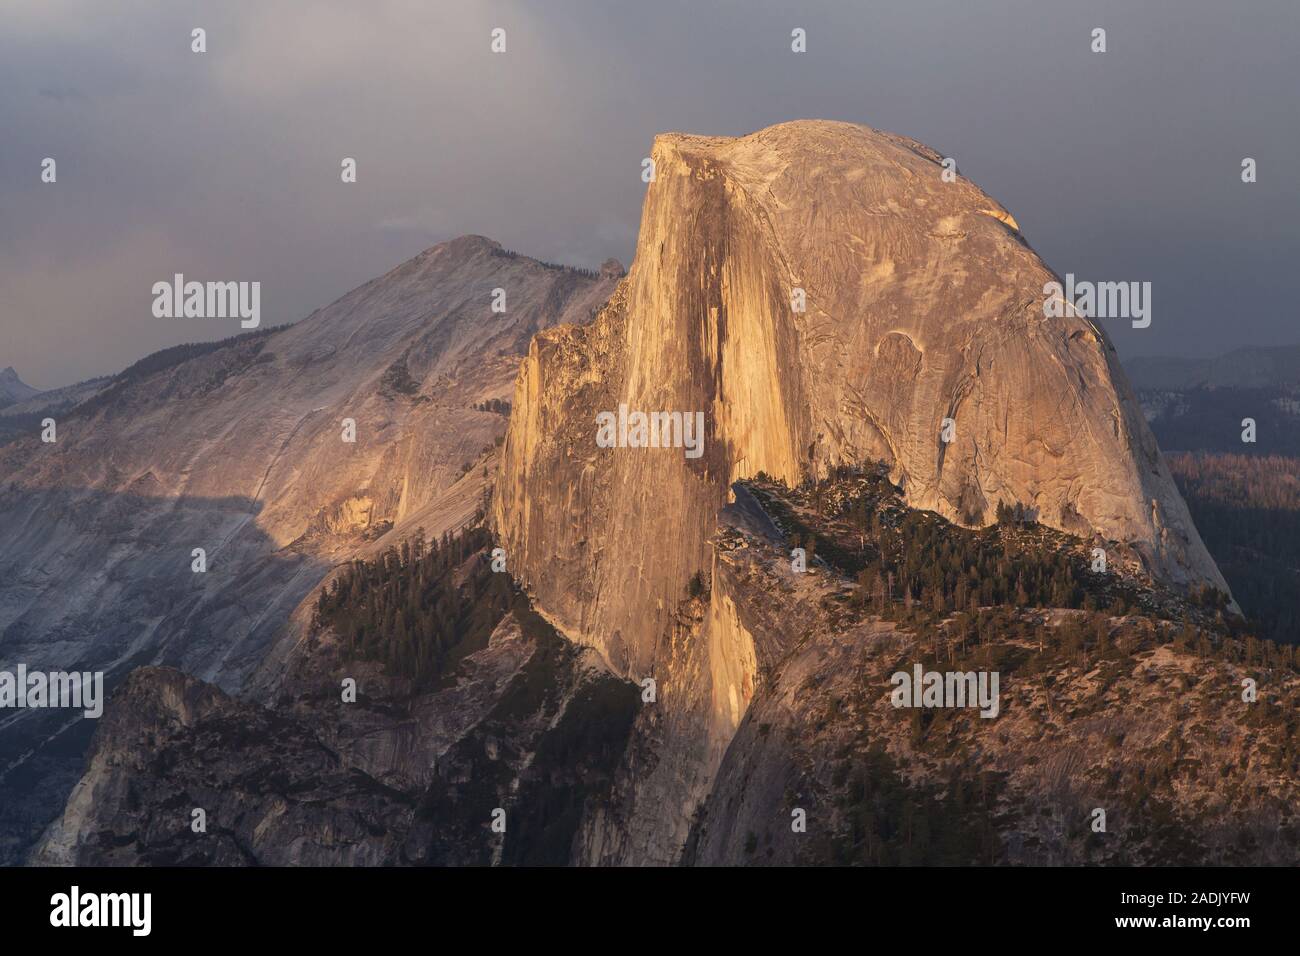 Sunset over Half Dome from Glacier Point, Yosemite National Park, California, USA. Stock Photo